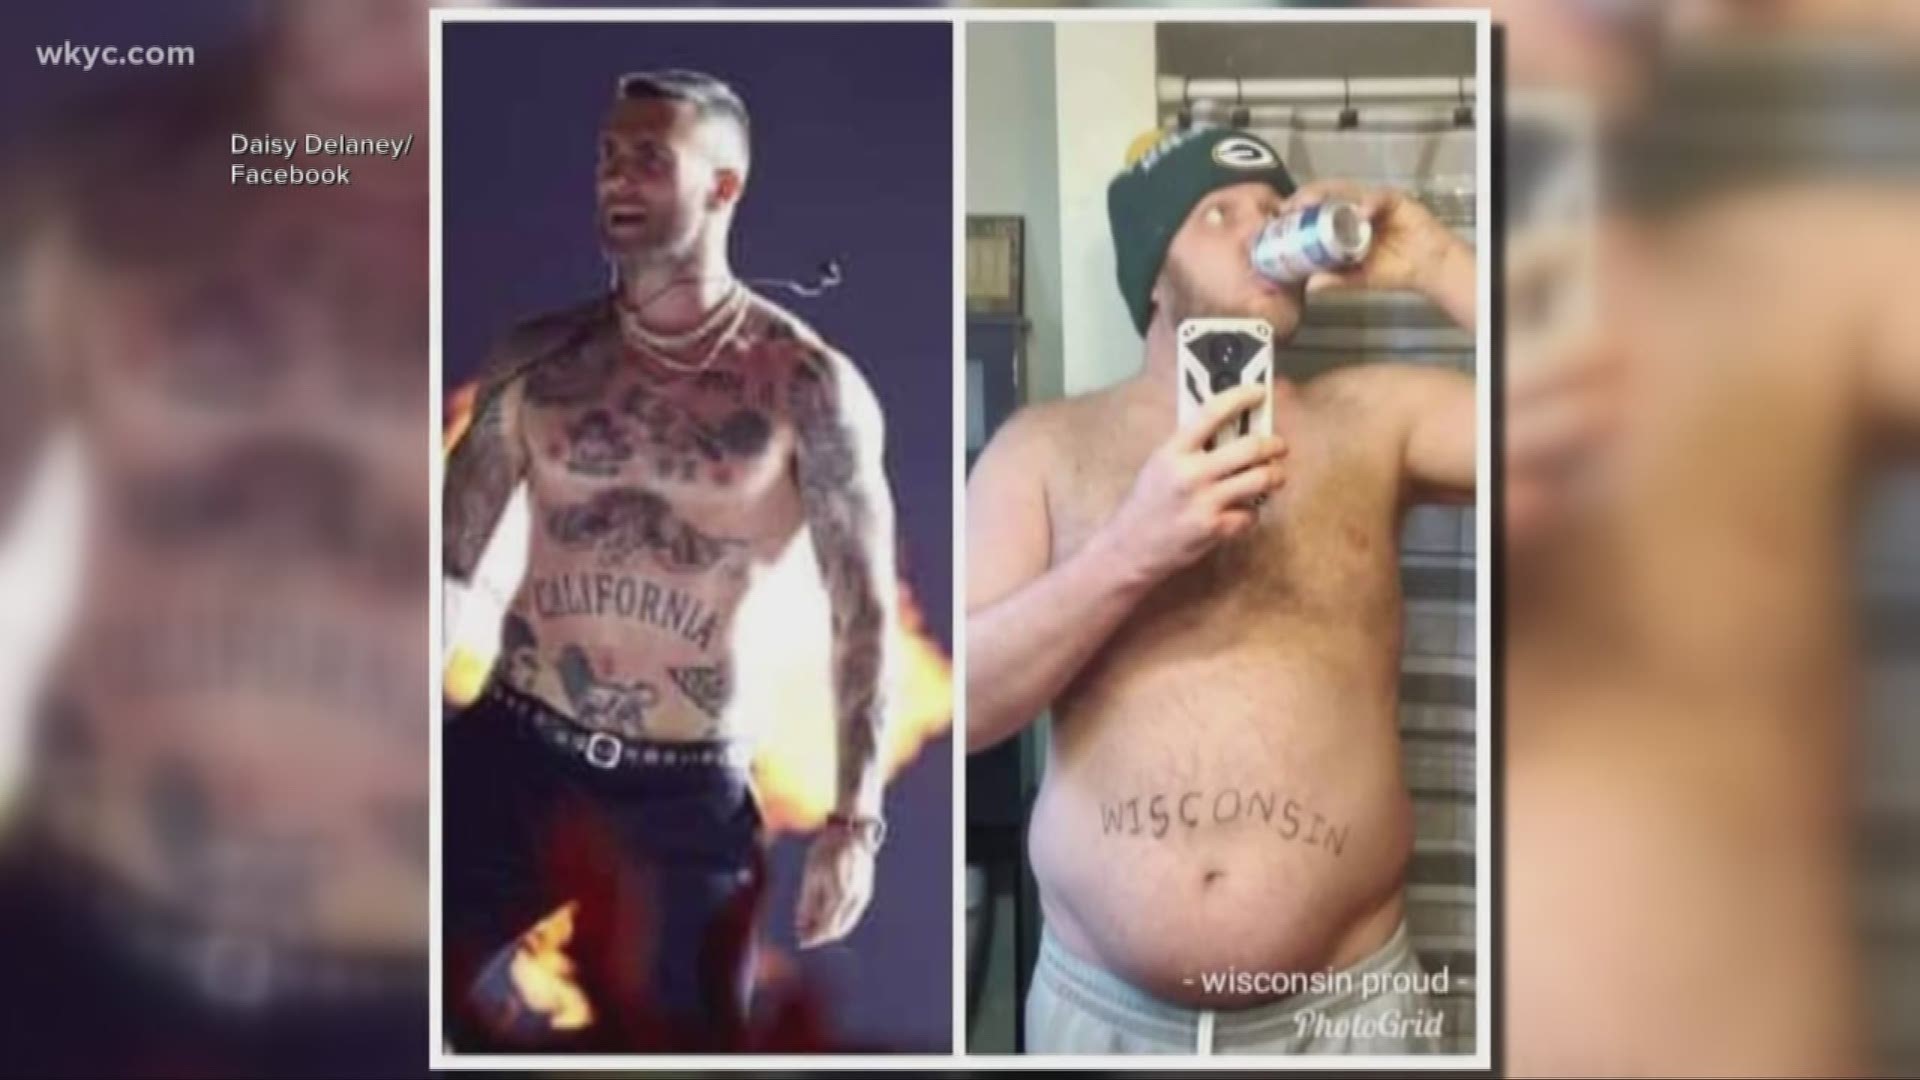 3 on 3: Men doing state belly tattoos in honor of Adam Levine at Super Bowl  